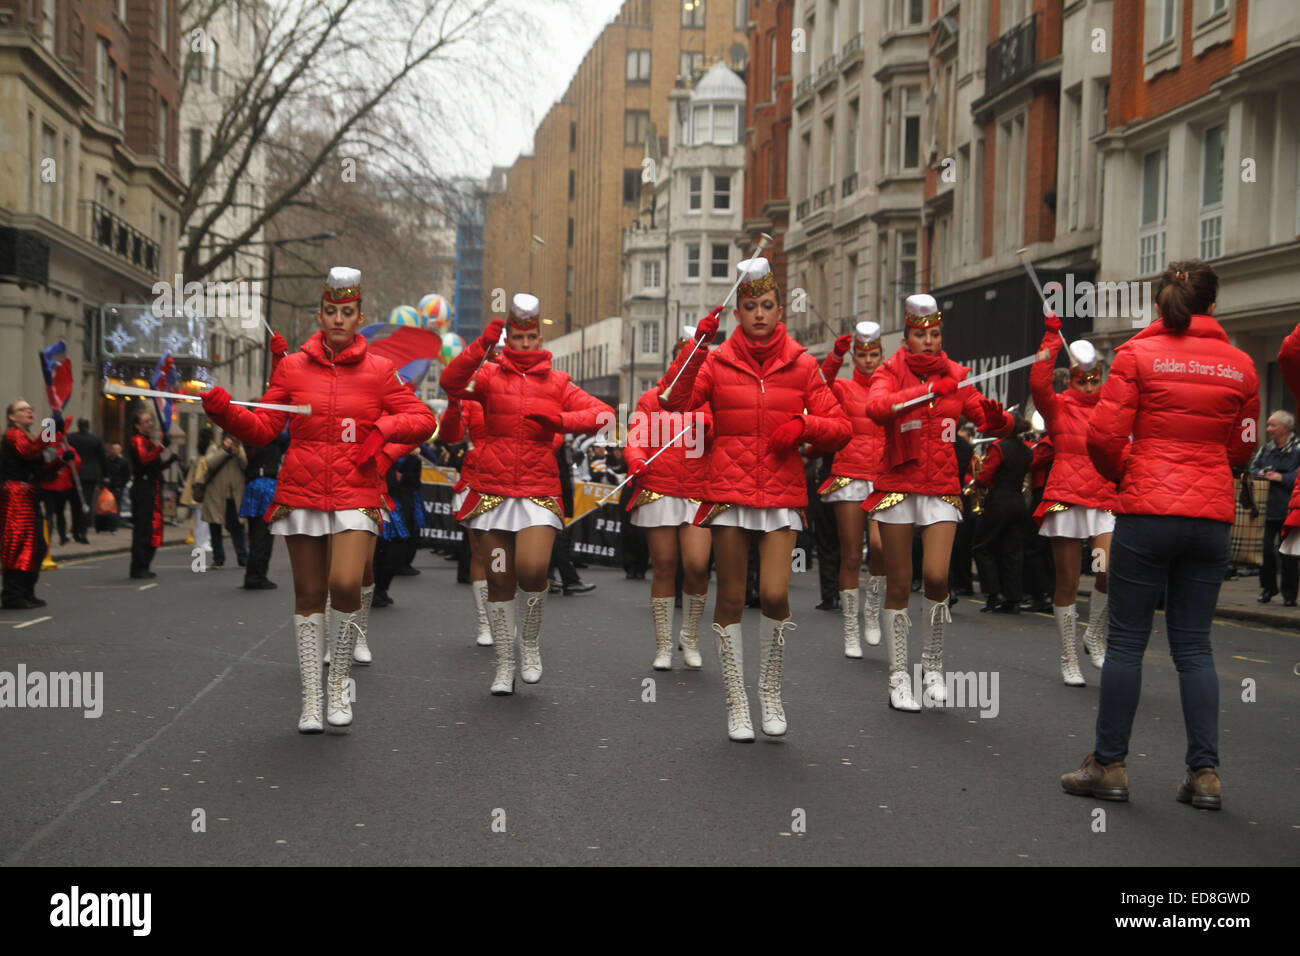 London, UK. 1 January 2015. Italian Cheerleaders the Golden Stars Sobine rehearse ahead of  the annual London new years parade. Londoners and tourists turned up in droves for the new years parade. The annual parade goes through Piccadilly, Regents street, Pall Mall and Whitehall a 2 mile route. Photo: David Mbiyu/ Alamy Live News Stock Photo